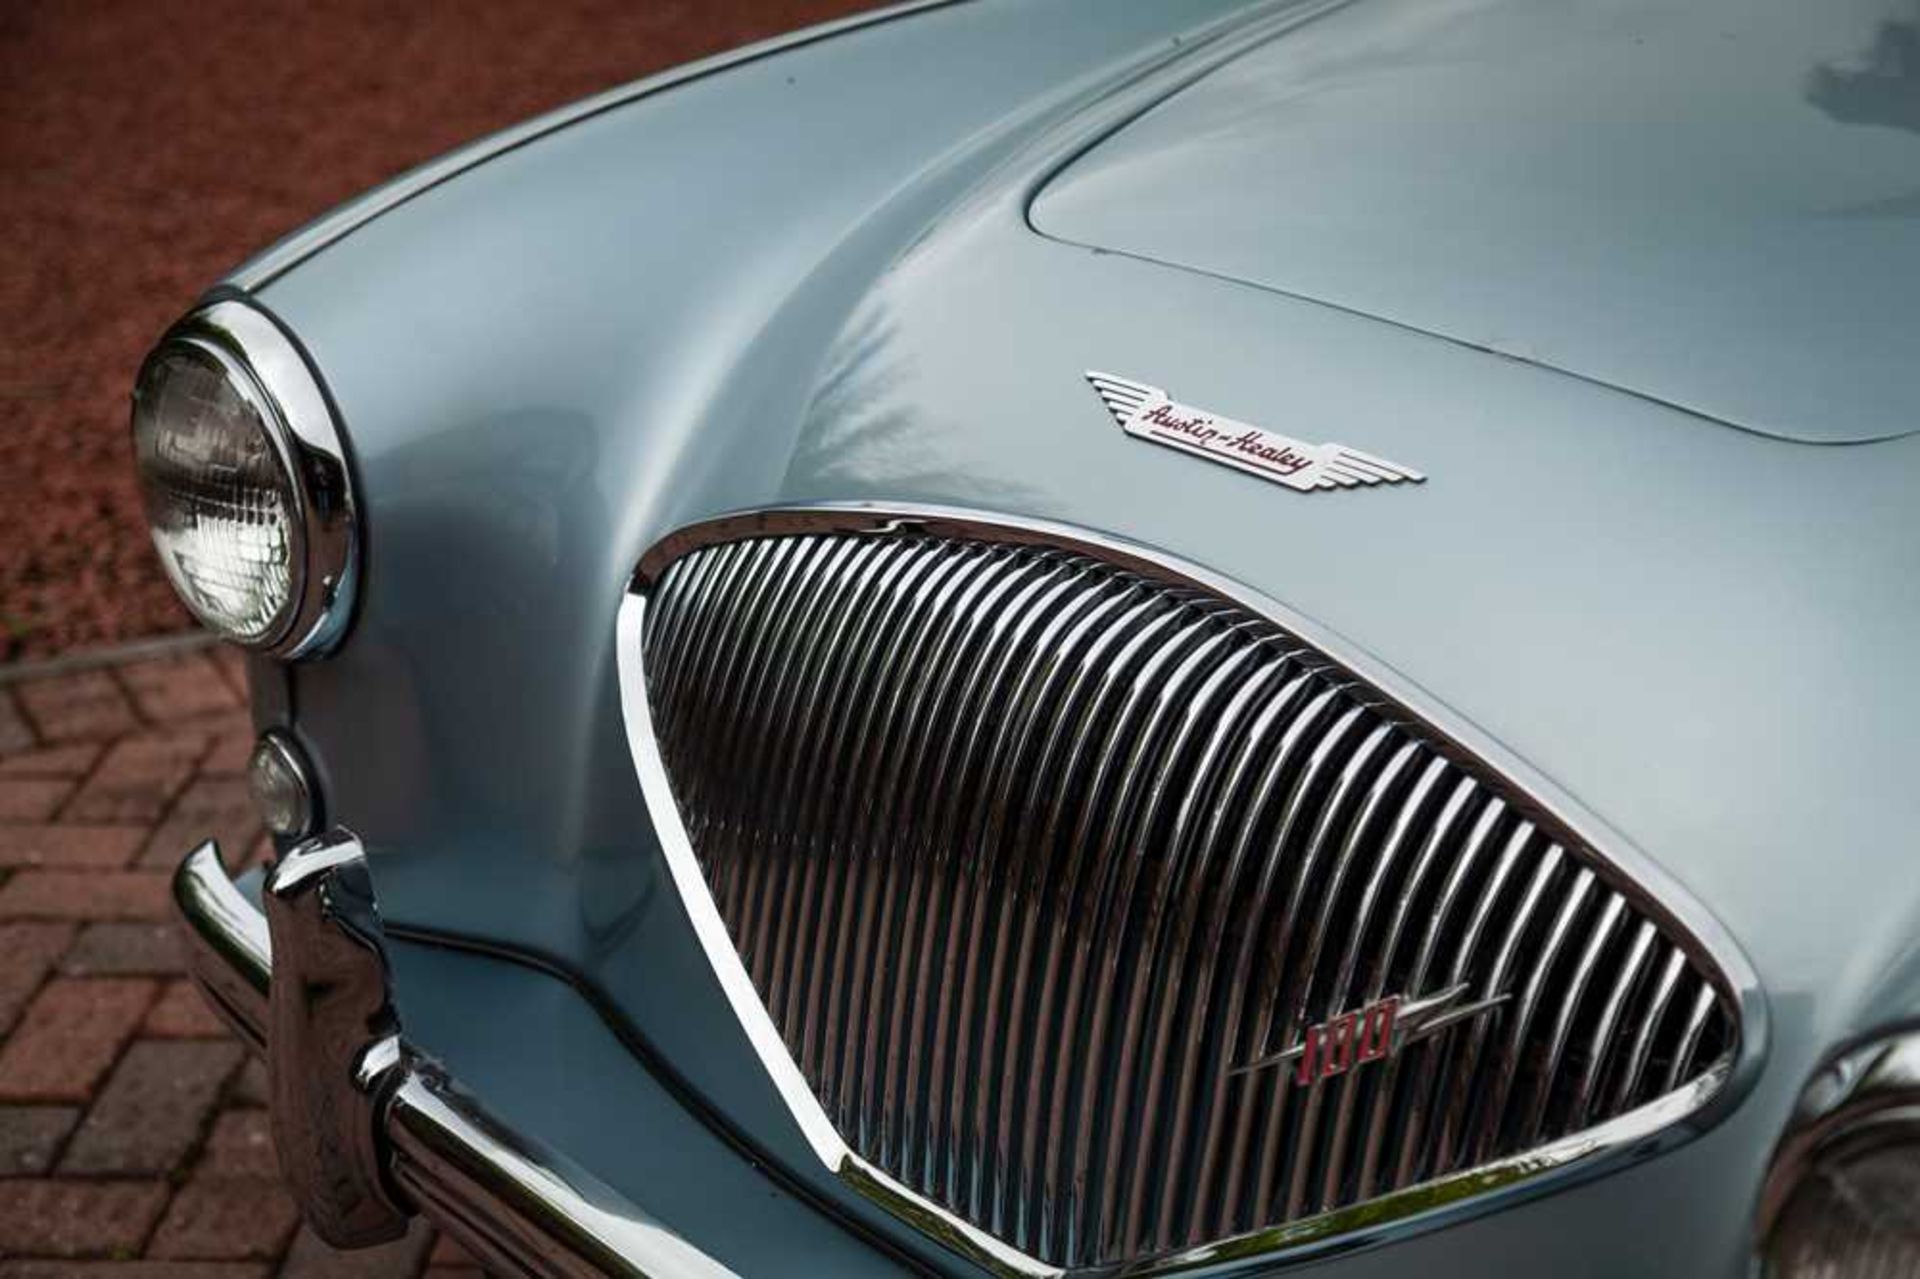 1955 Austin-Healey 100/4 Subtly Upgraded with 5-Speed Transmission and Front Disc Brakes - Image 37 of 54